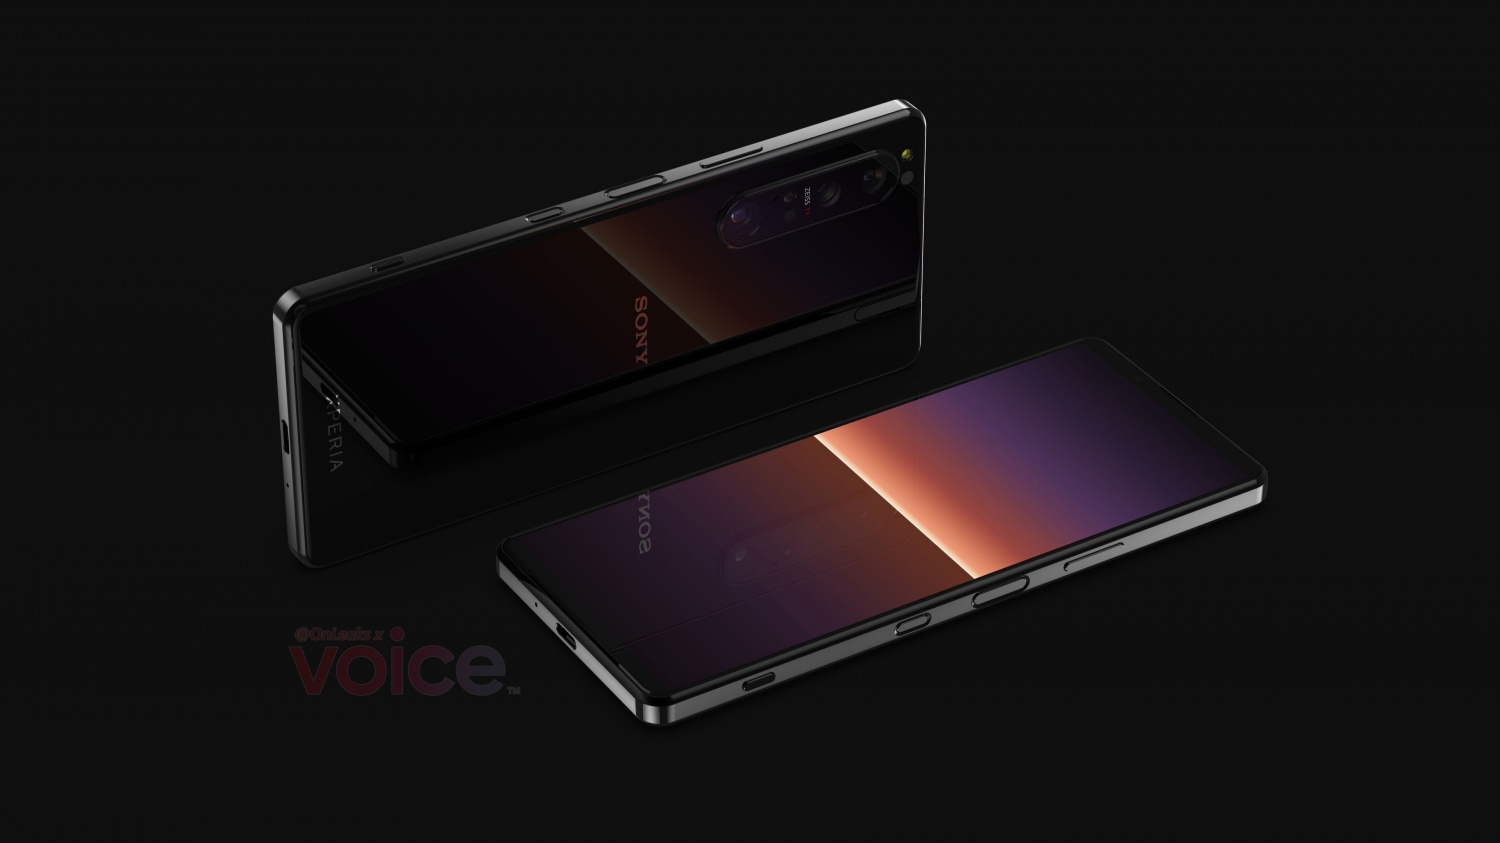 Unofficial Render: Sony Xperia 1 III